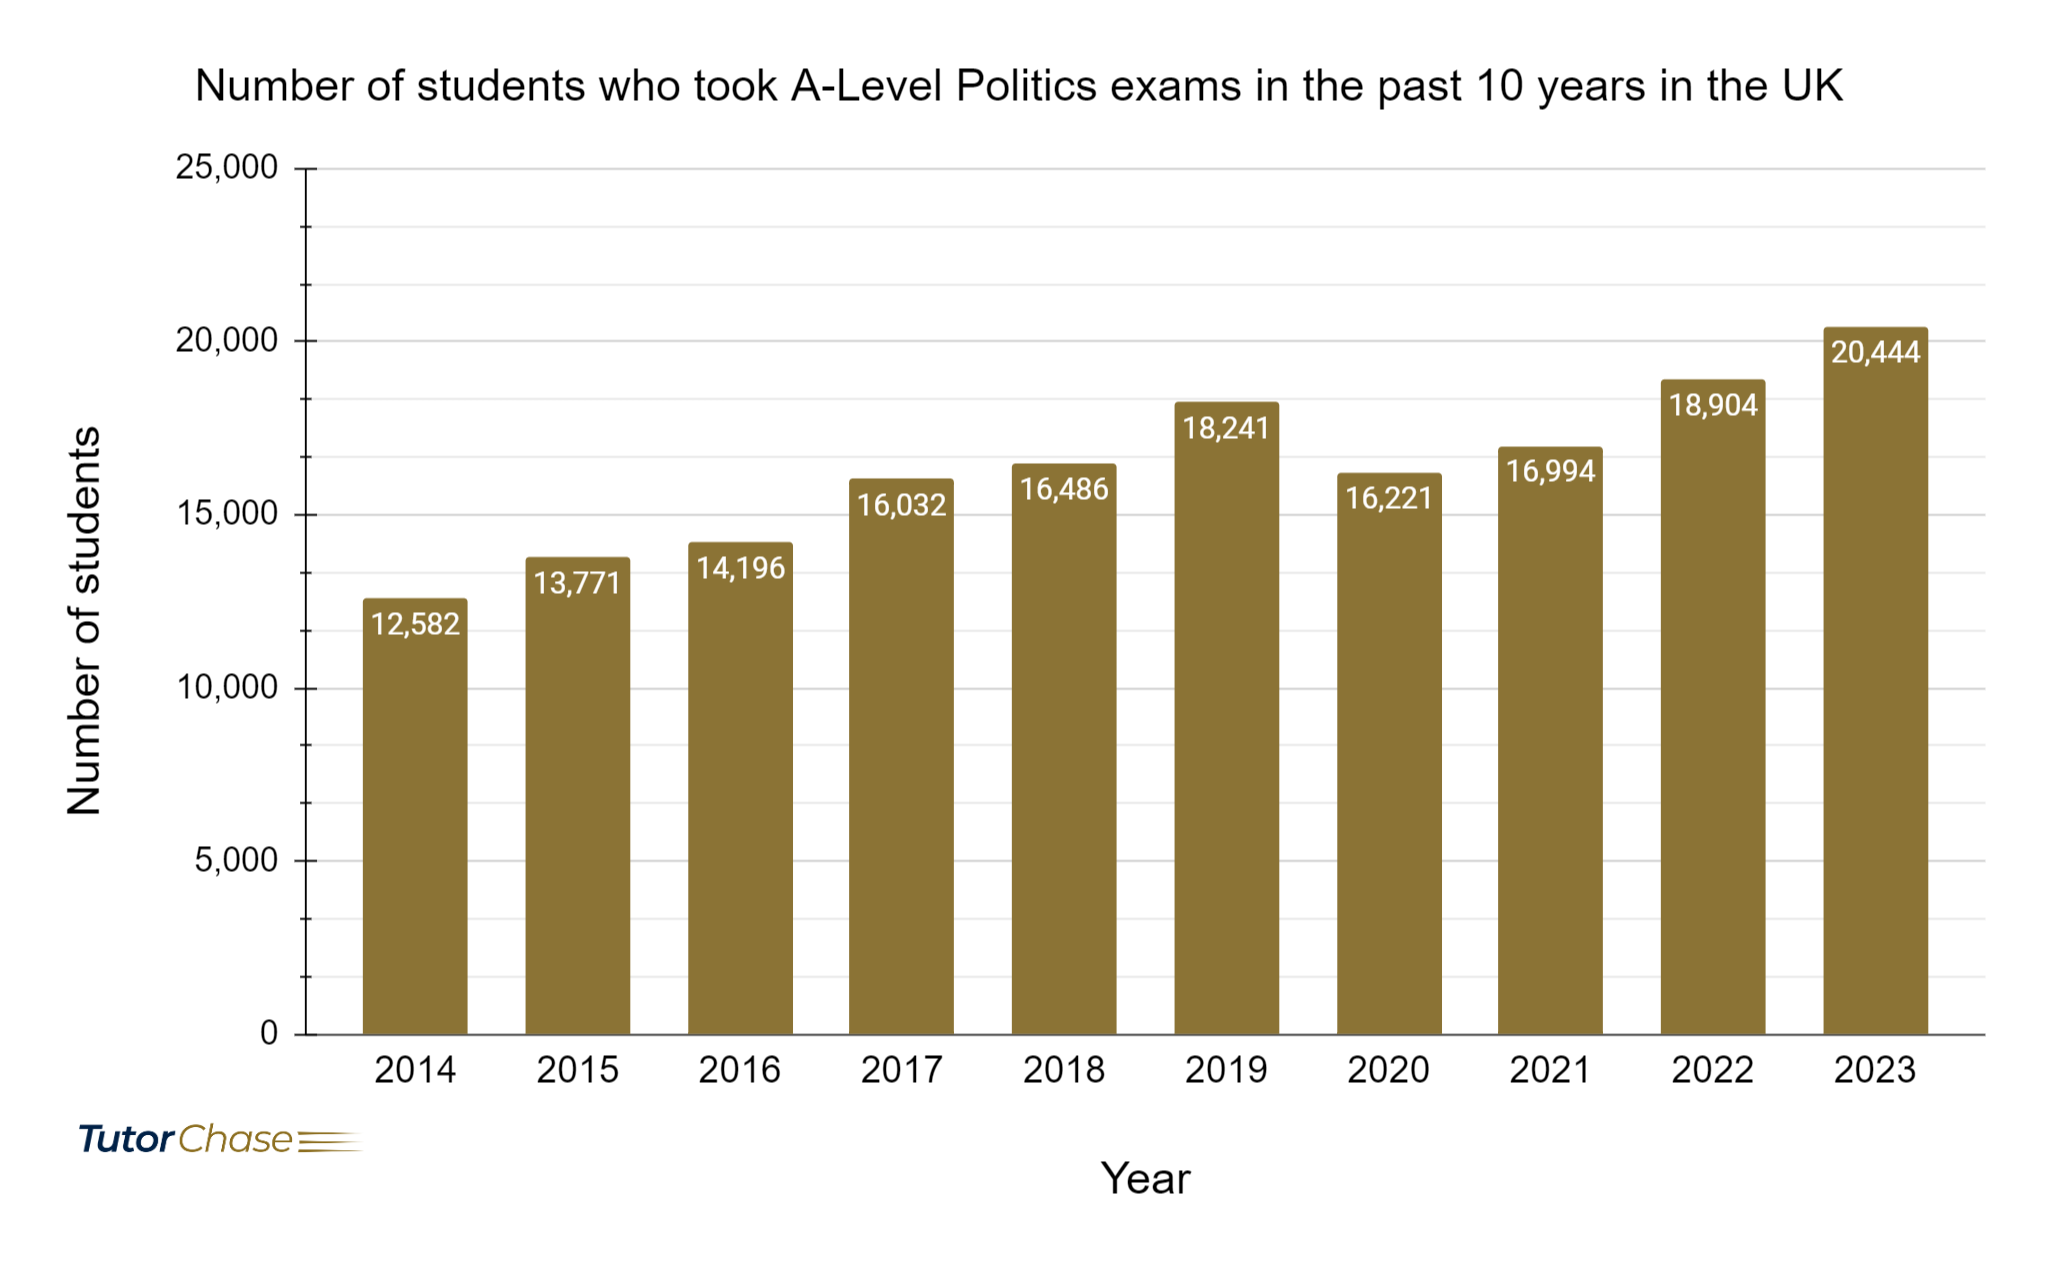 Number of students who took A-Level Politics exams in the past 10 years